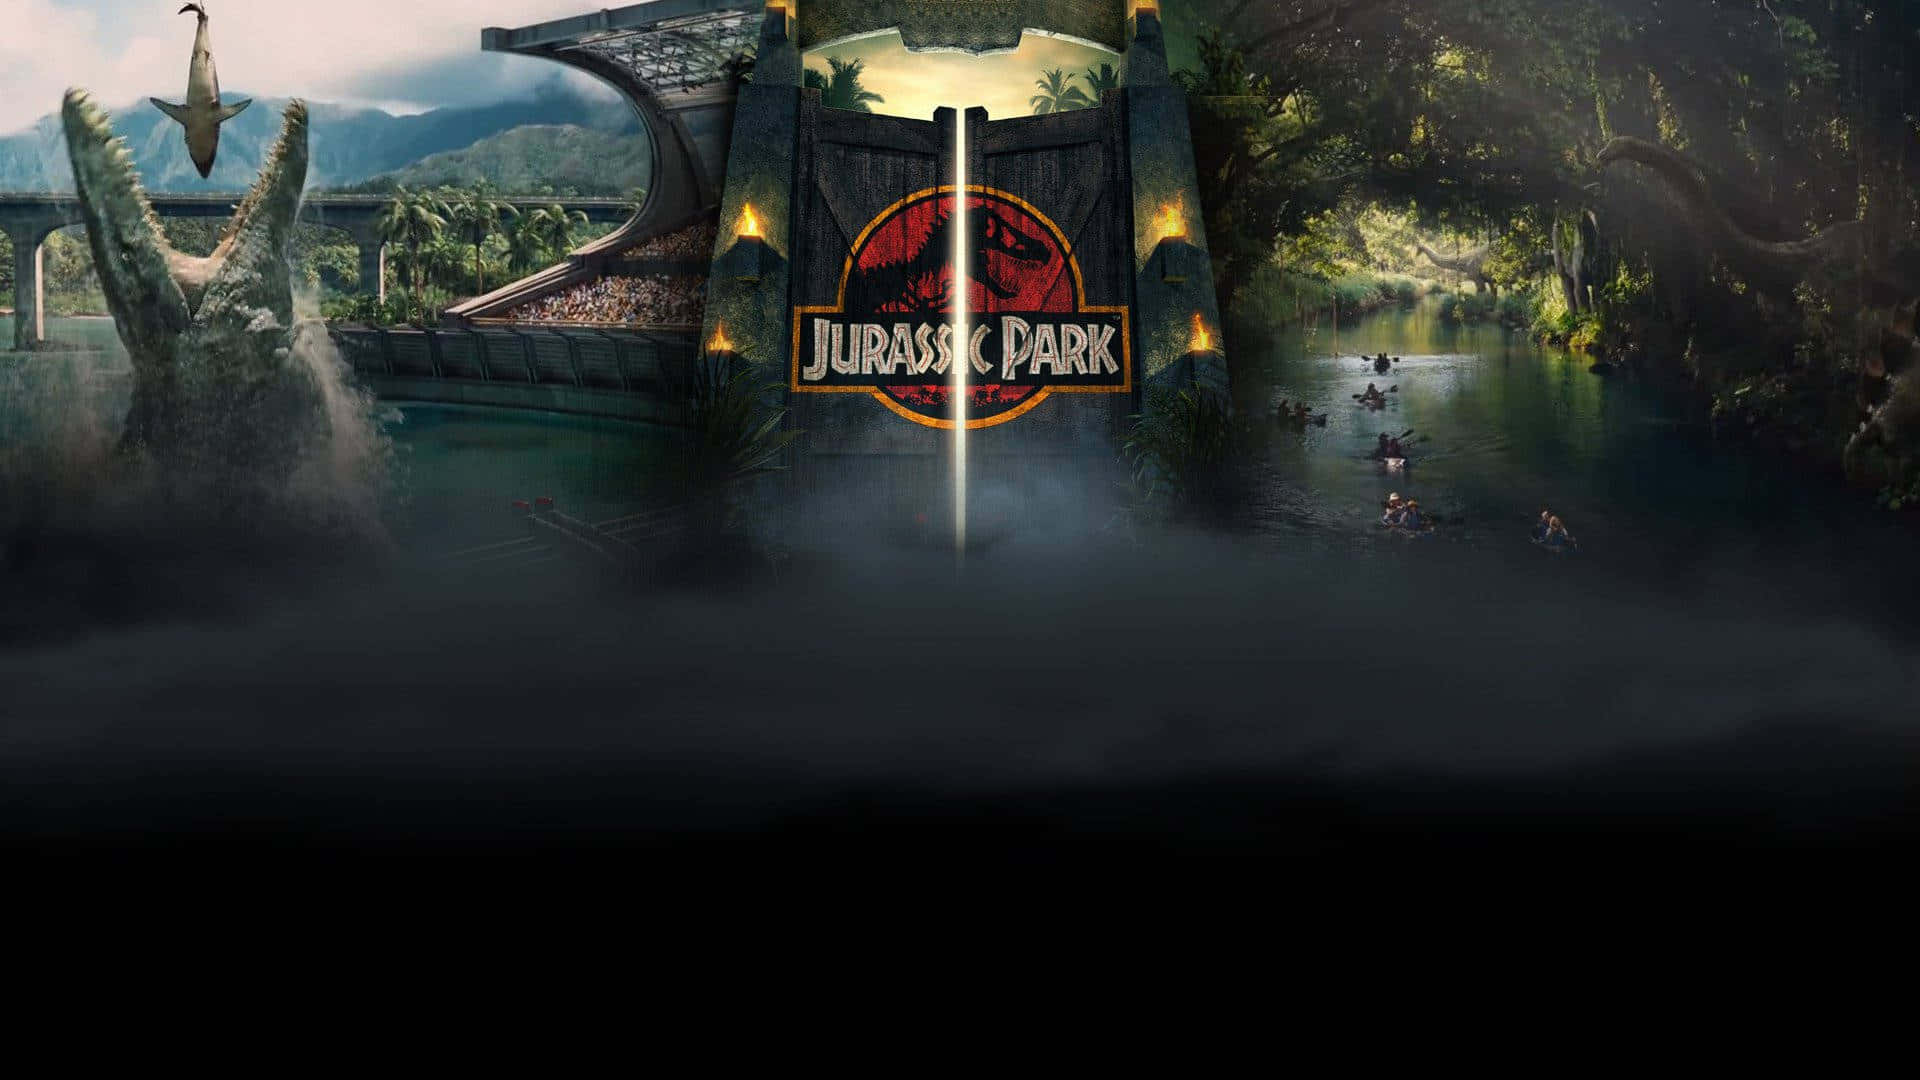 "Discover a thrilling adventure at Jurassic World!"